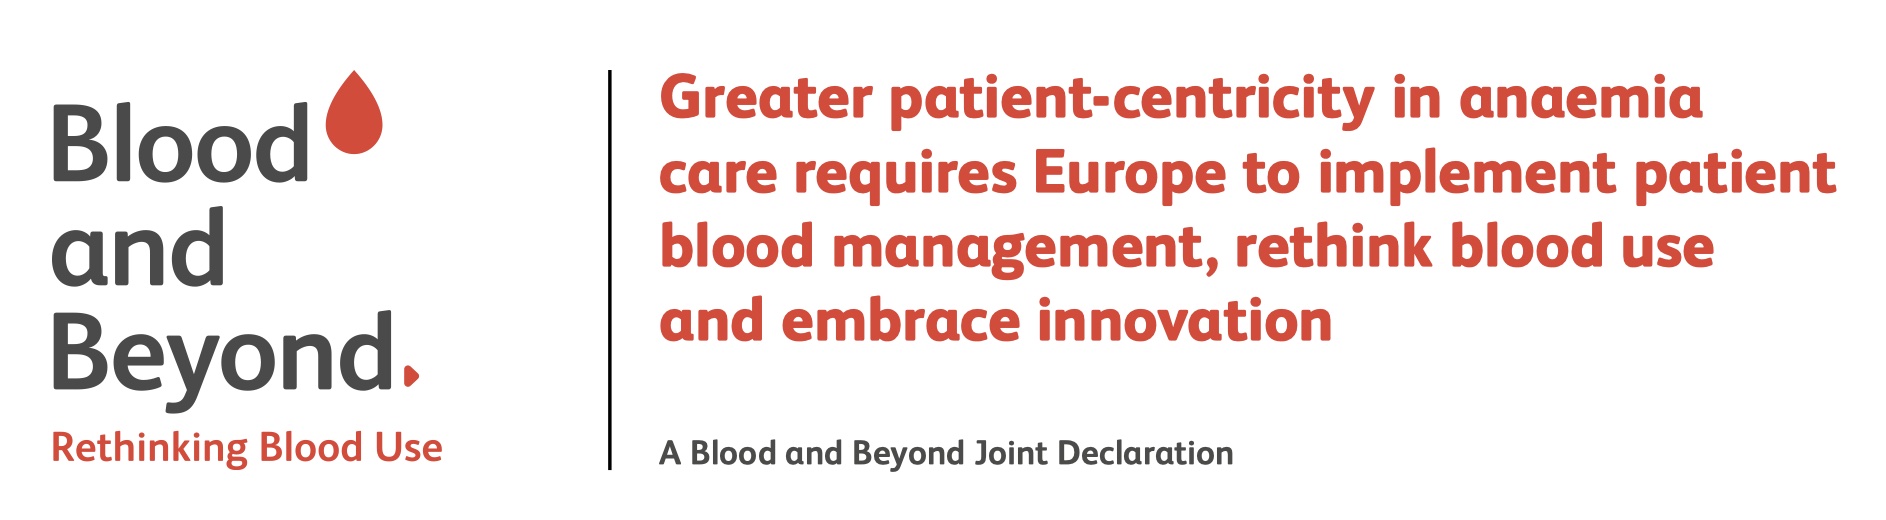 Blood and Beyond patient-centric anaemia article